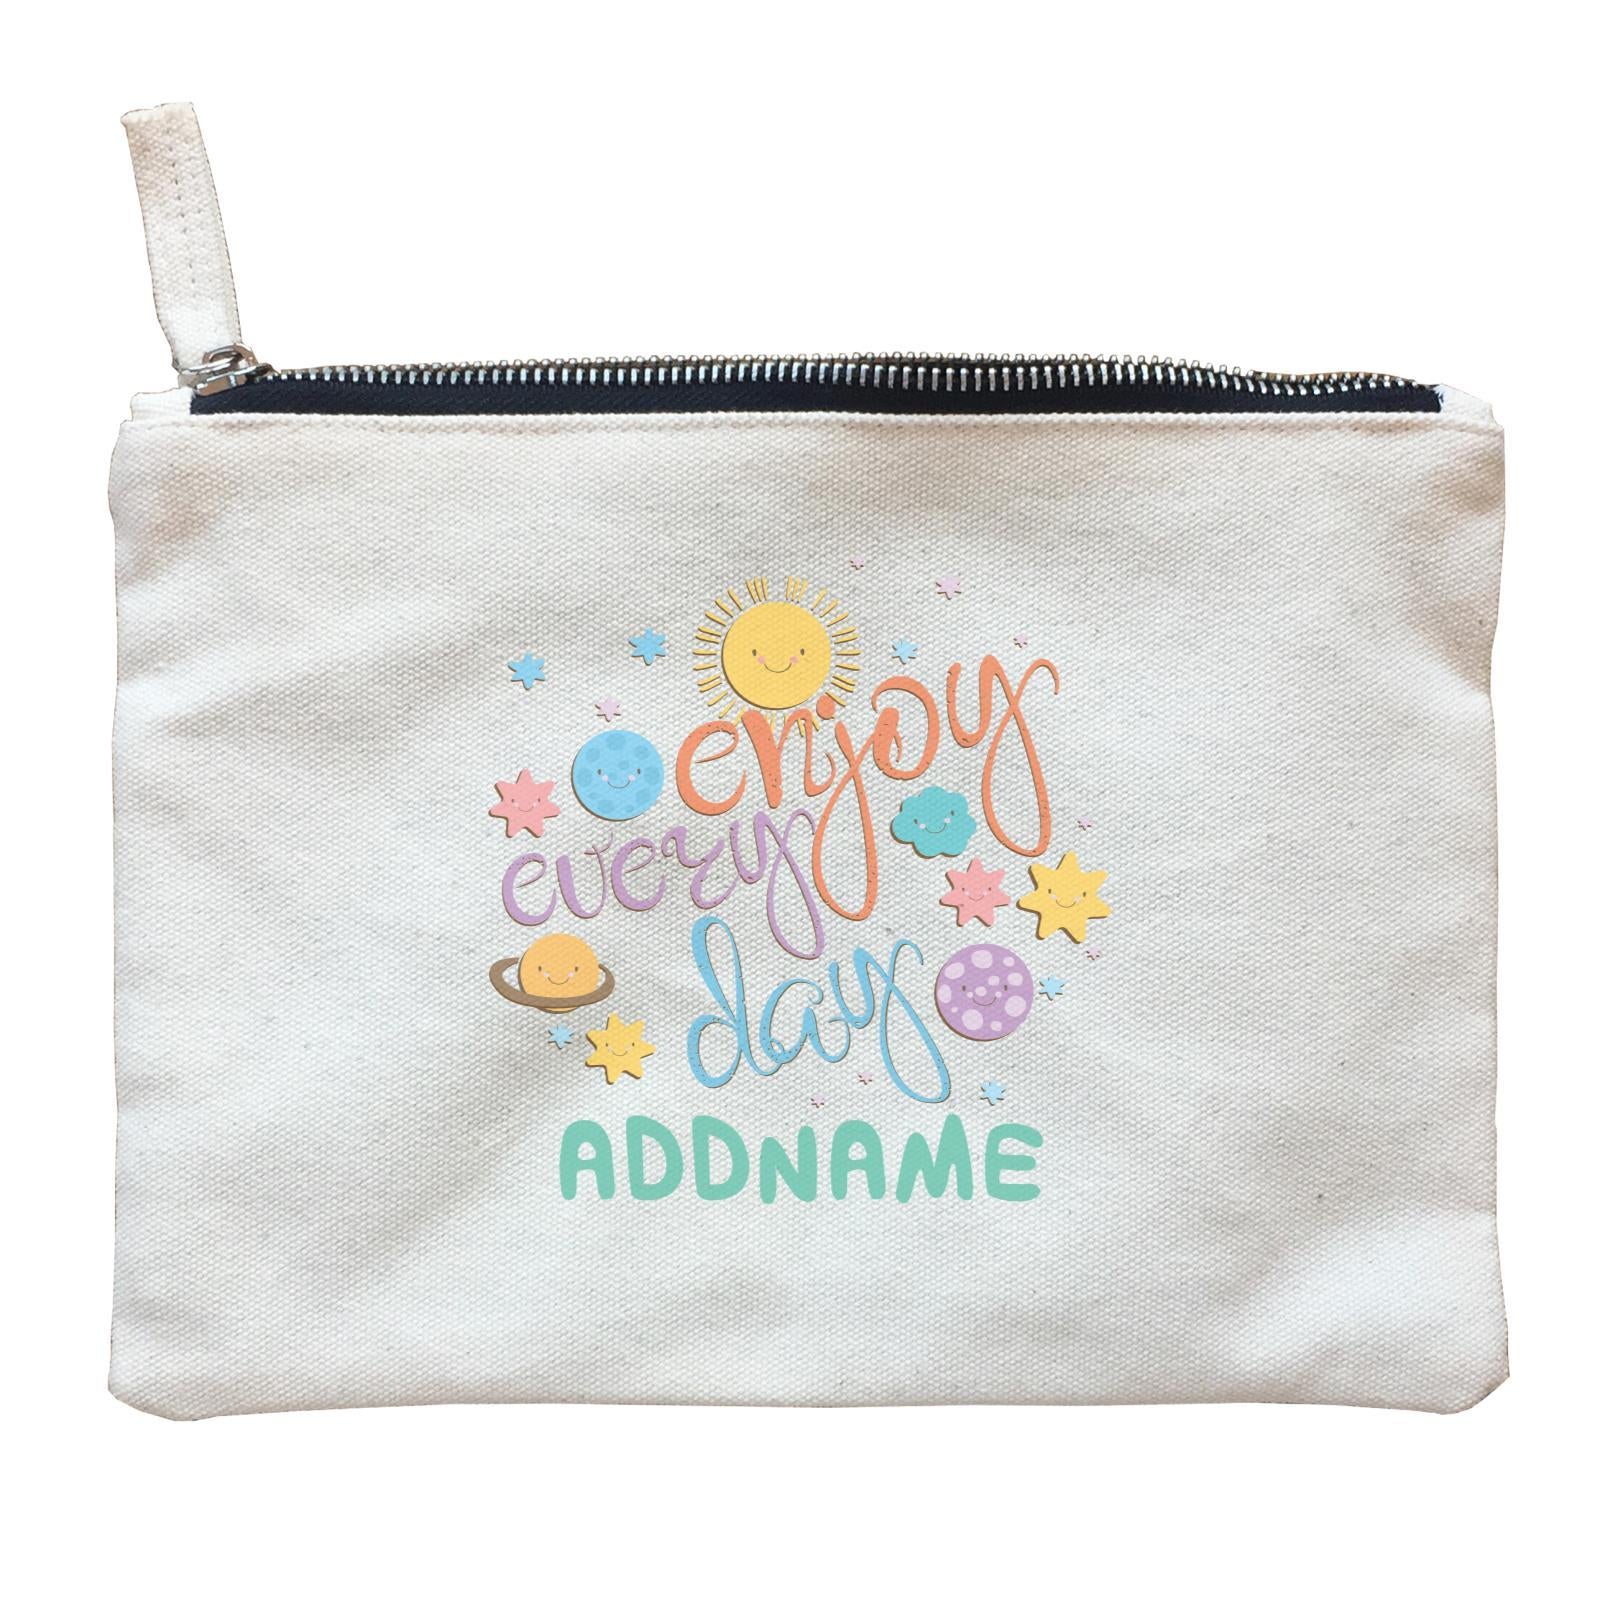 Children's Day Gift Series Enjoy Every Day Space Addname  Zipper Pouch